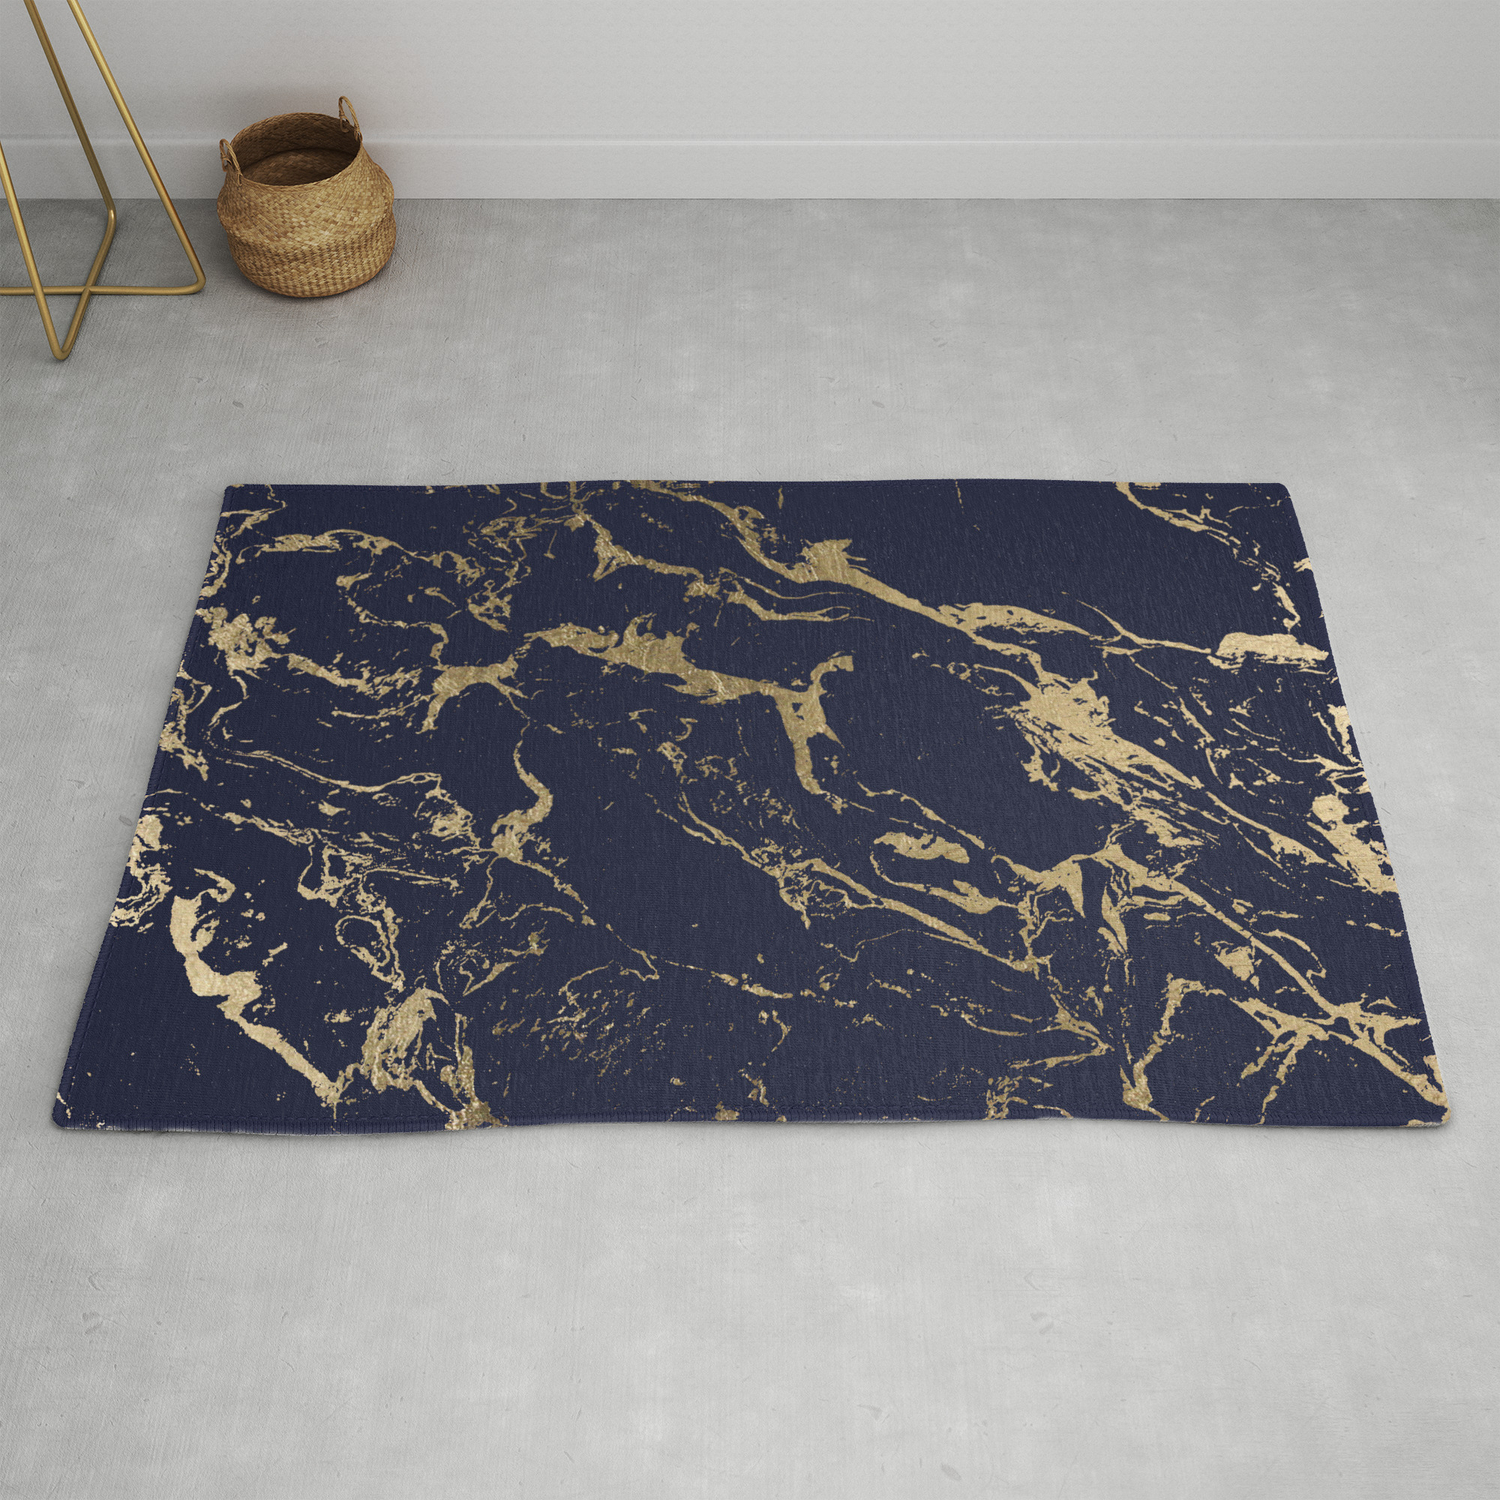 Modern Luxury Chic Navy Blue Gold, Navy Blue Patterned Rug